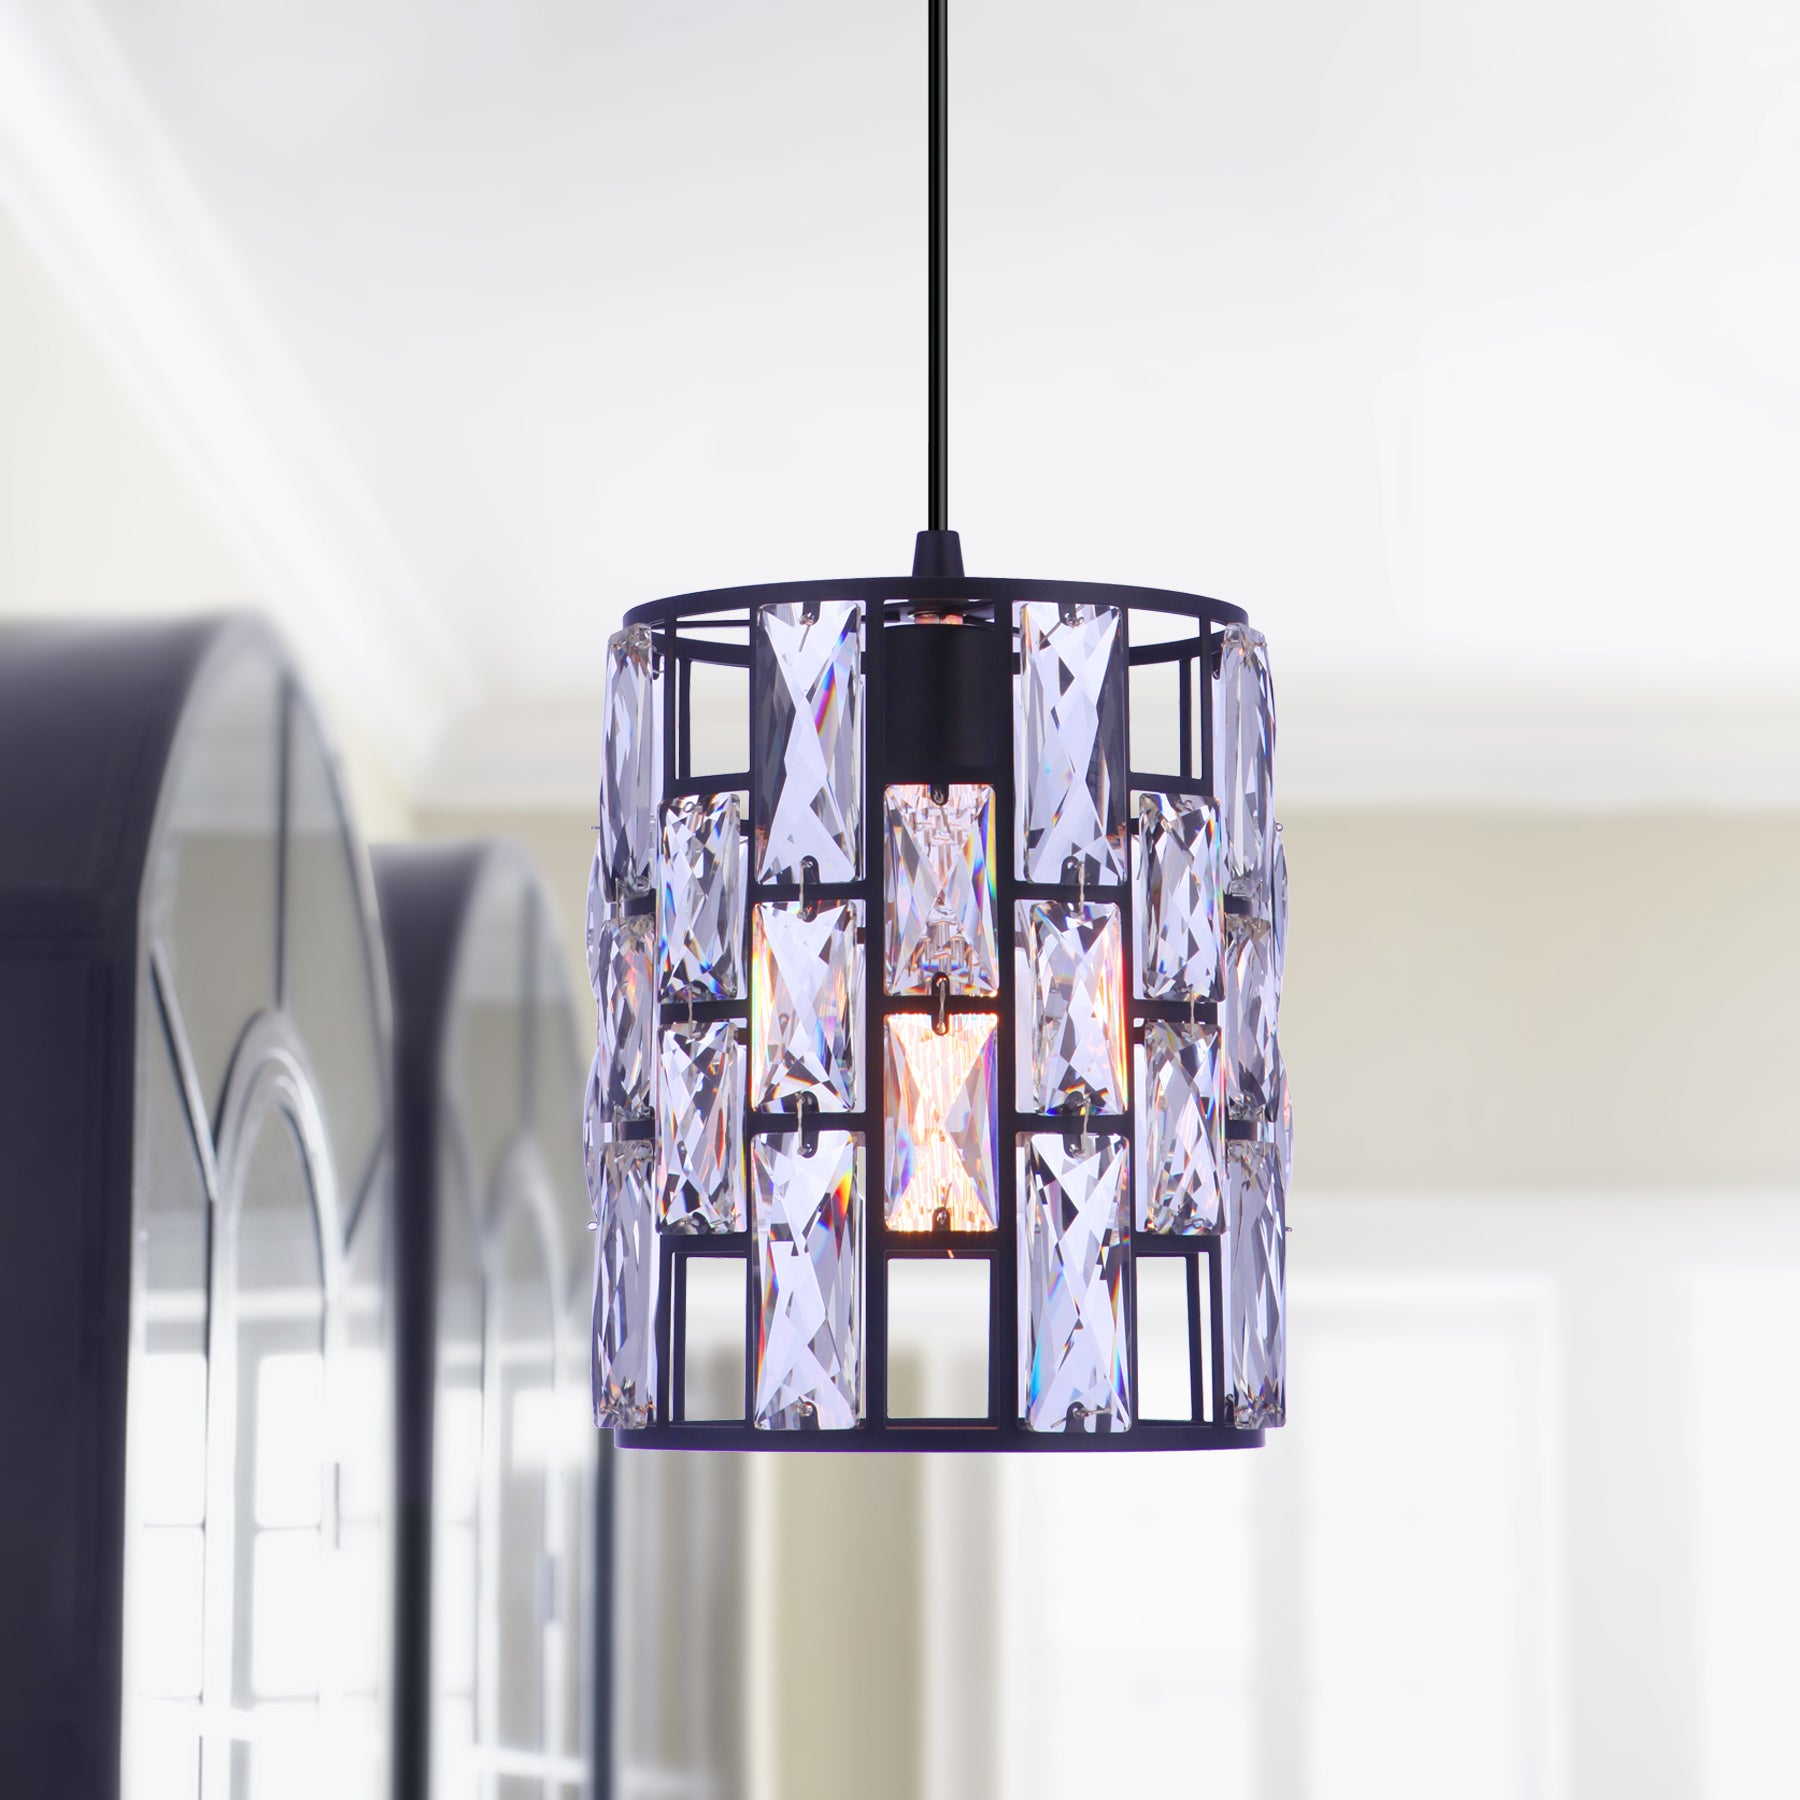 Worth Home Products - Matte Black Cylinder Crystal luxury Instant Pendant Light - Can light to pendant light Conversion kit for kitchen island, breakfast nook, dinig room, living room and home office - PBN-2357-65MB